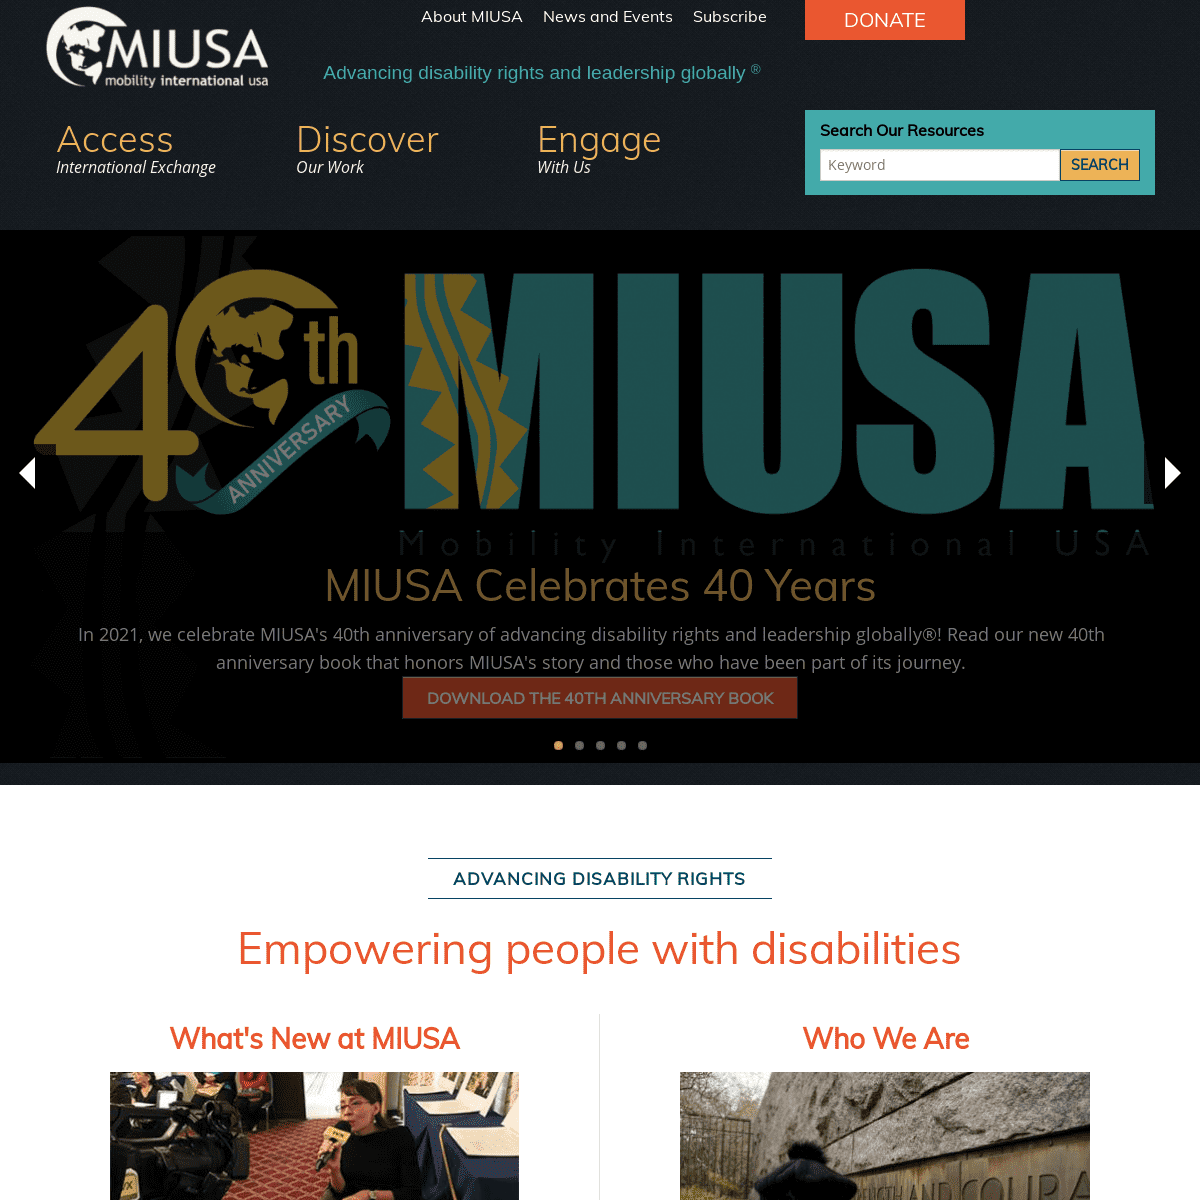 A complete backup of https://miusa.org